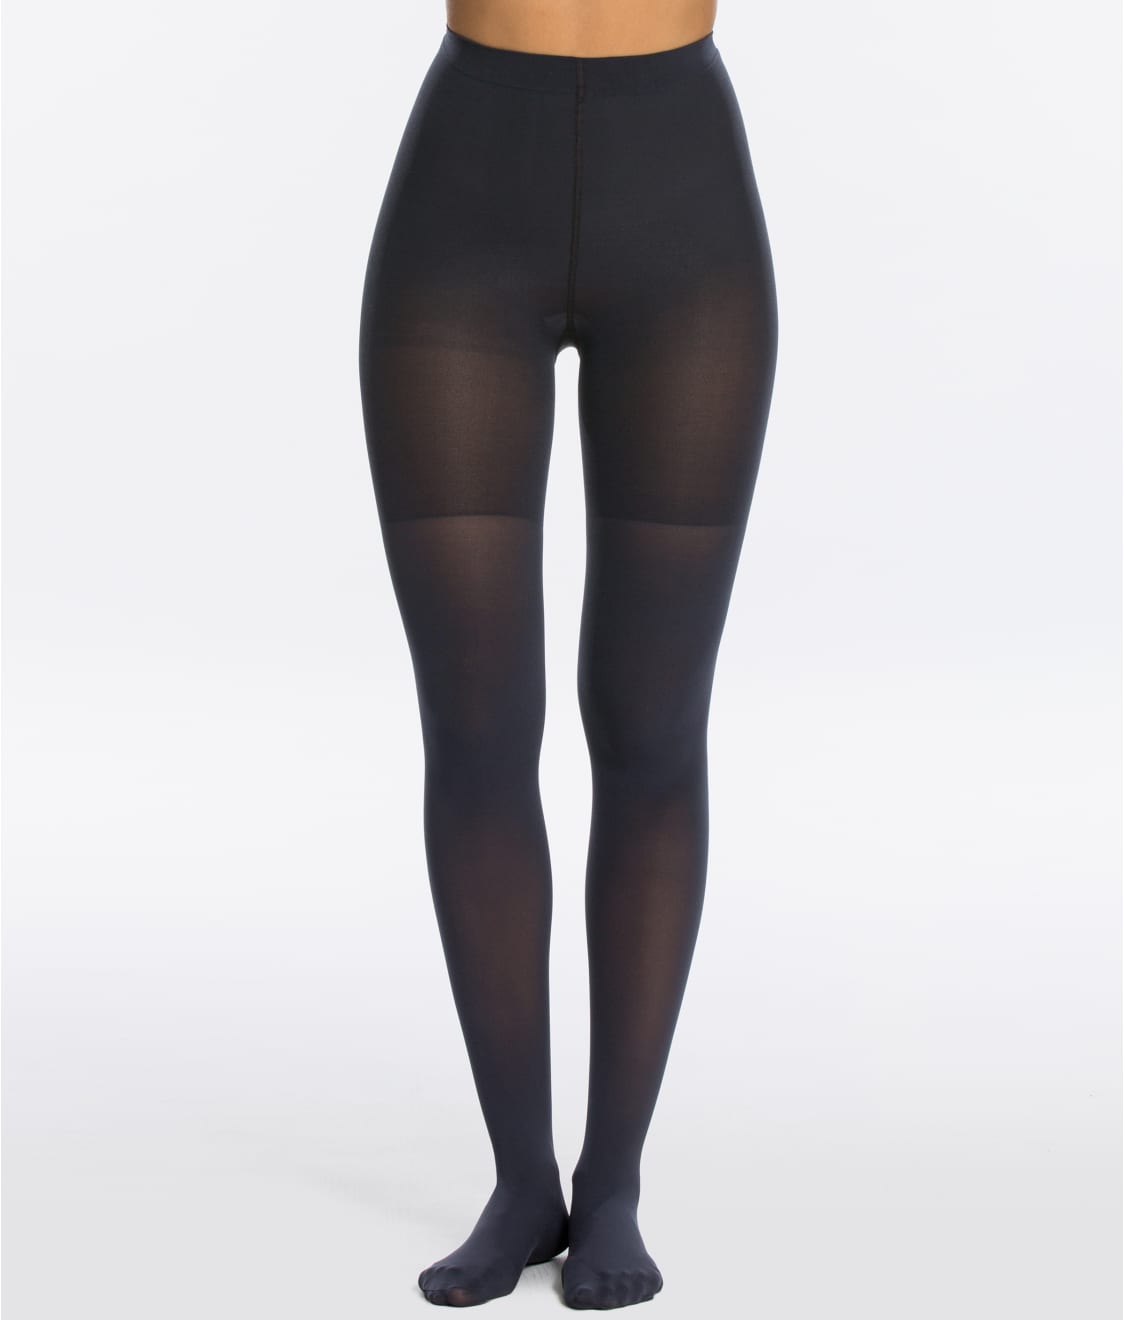 Details about   SPANX 2448 tight-end tights Floral Check black B body shaping slimming 